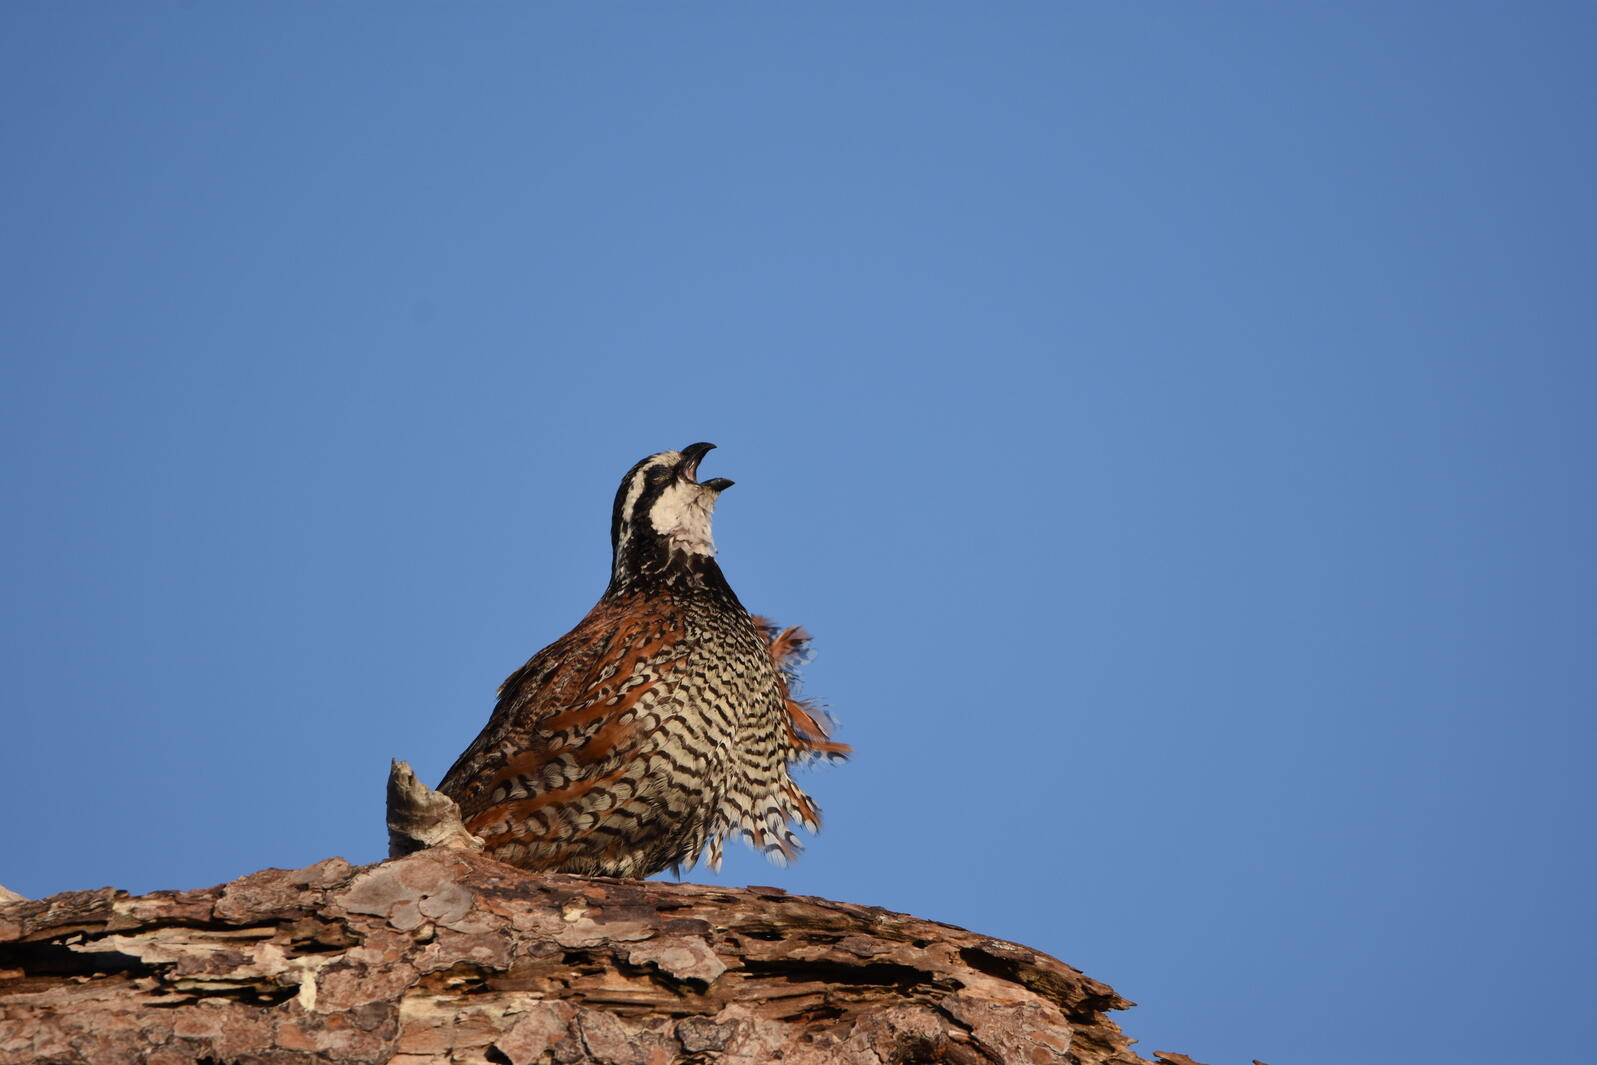 A Northern Bobwhite calling while standing on a log.